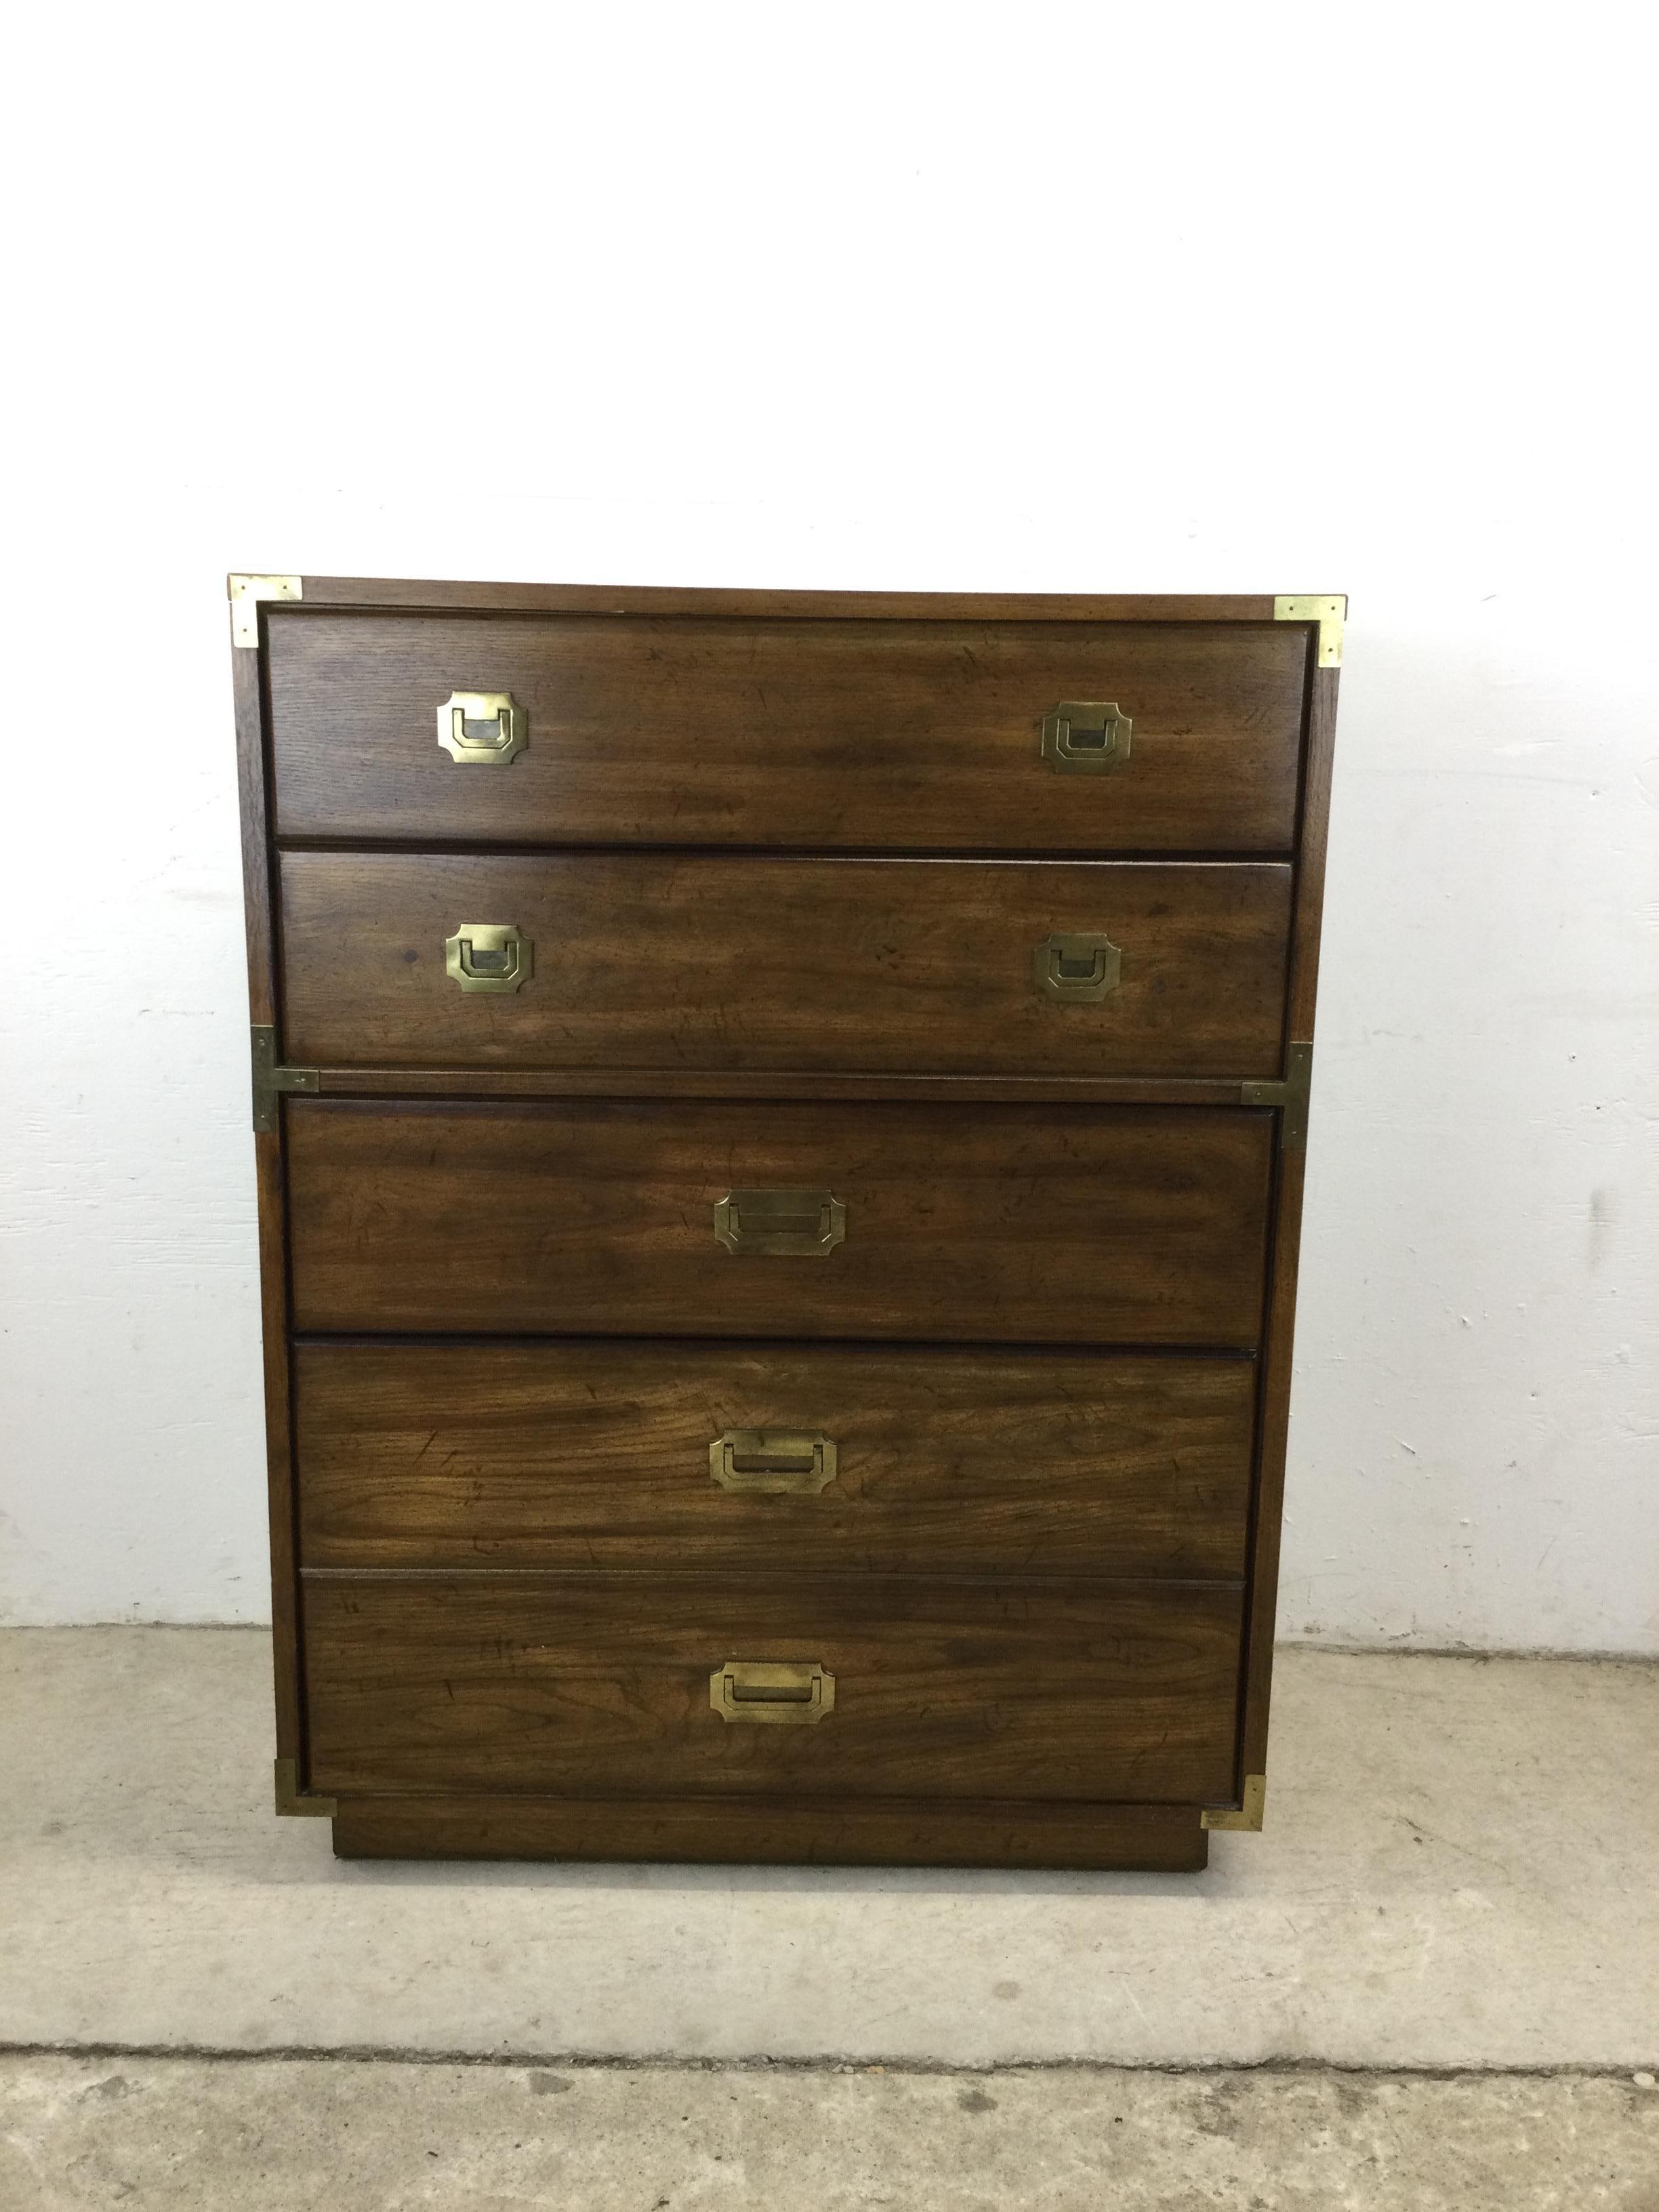 This mid century highboy dresser features dark oak finish, durable vinyl top with faux wood grain, five dovetailed drawers, and brass accented hardware.

Pair of matching three drawer chests available separately.

Dimensions: 34w 18d